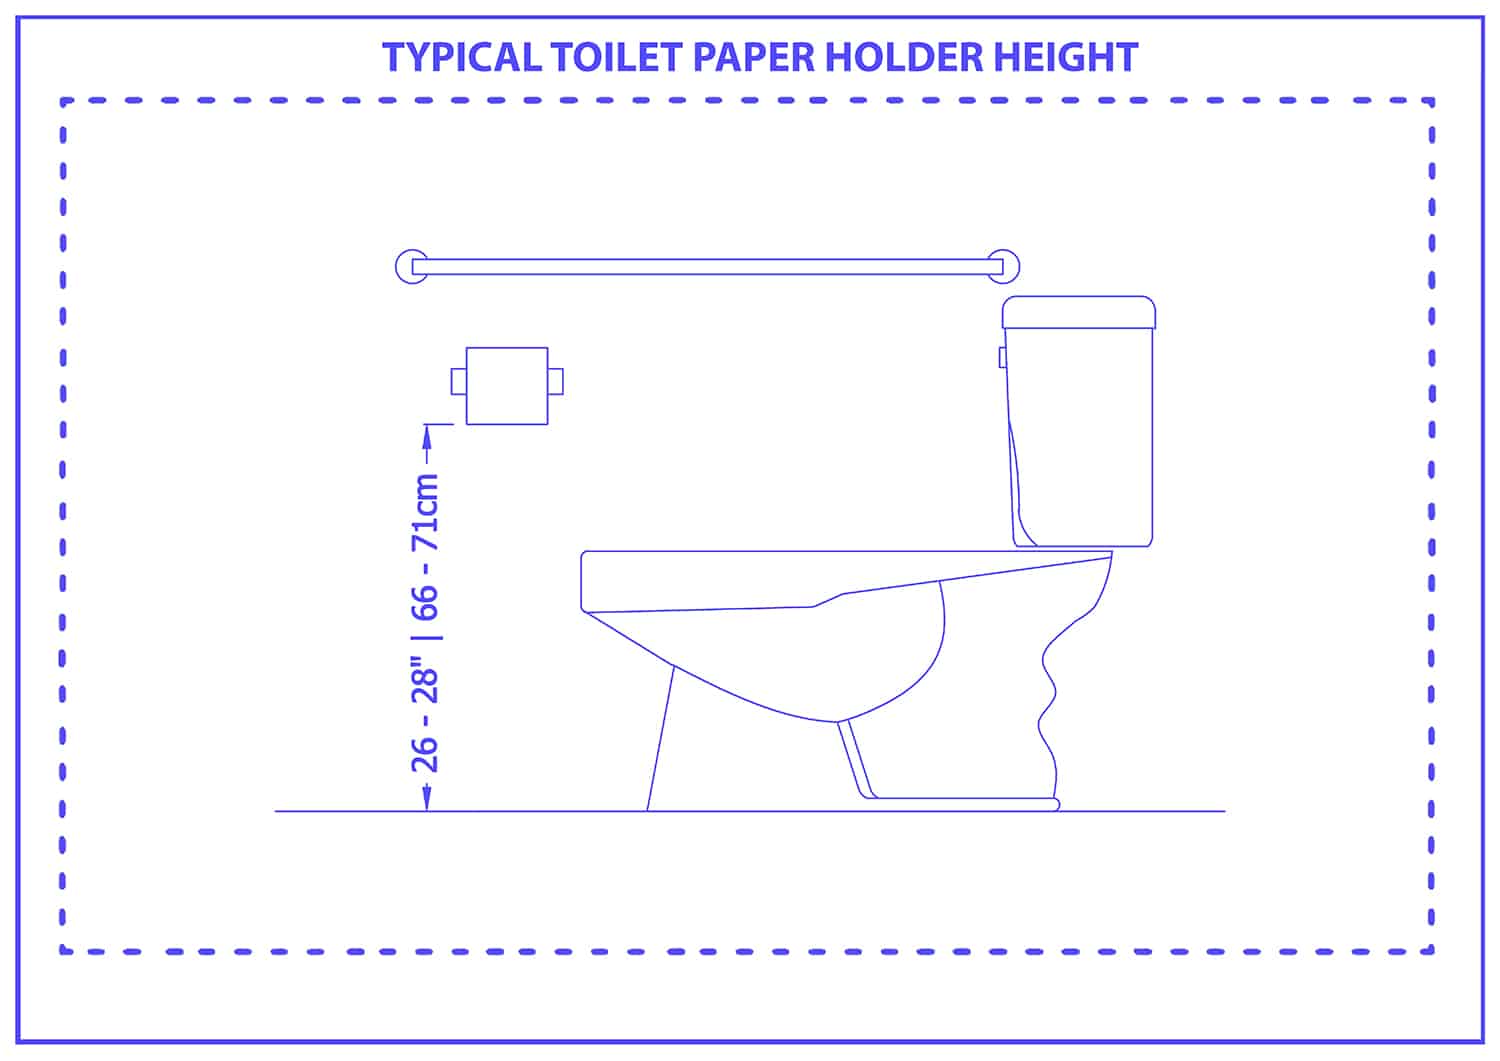 Typical toilet paper holder height